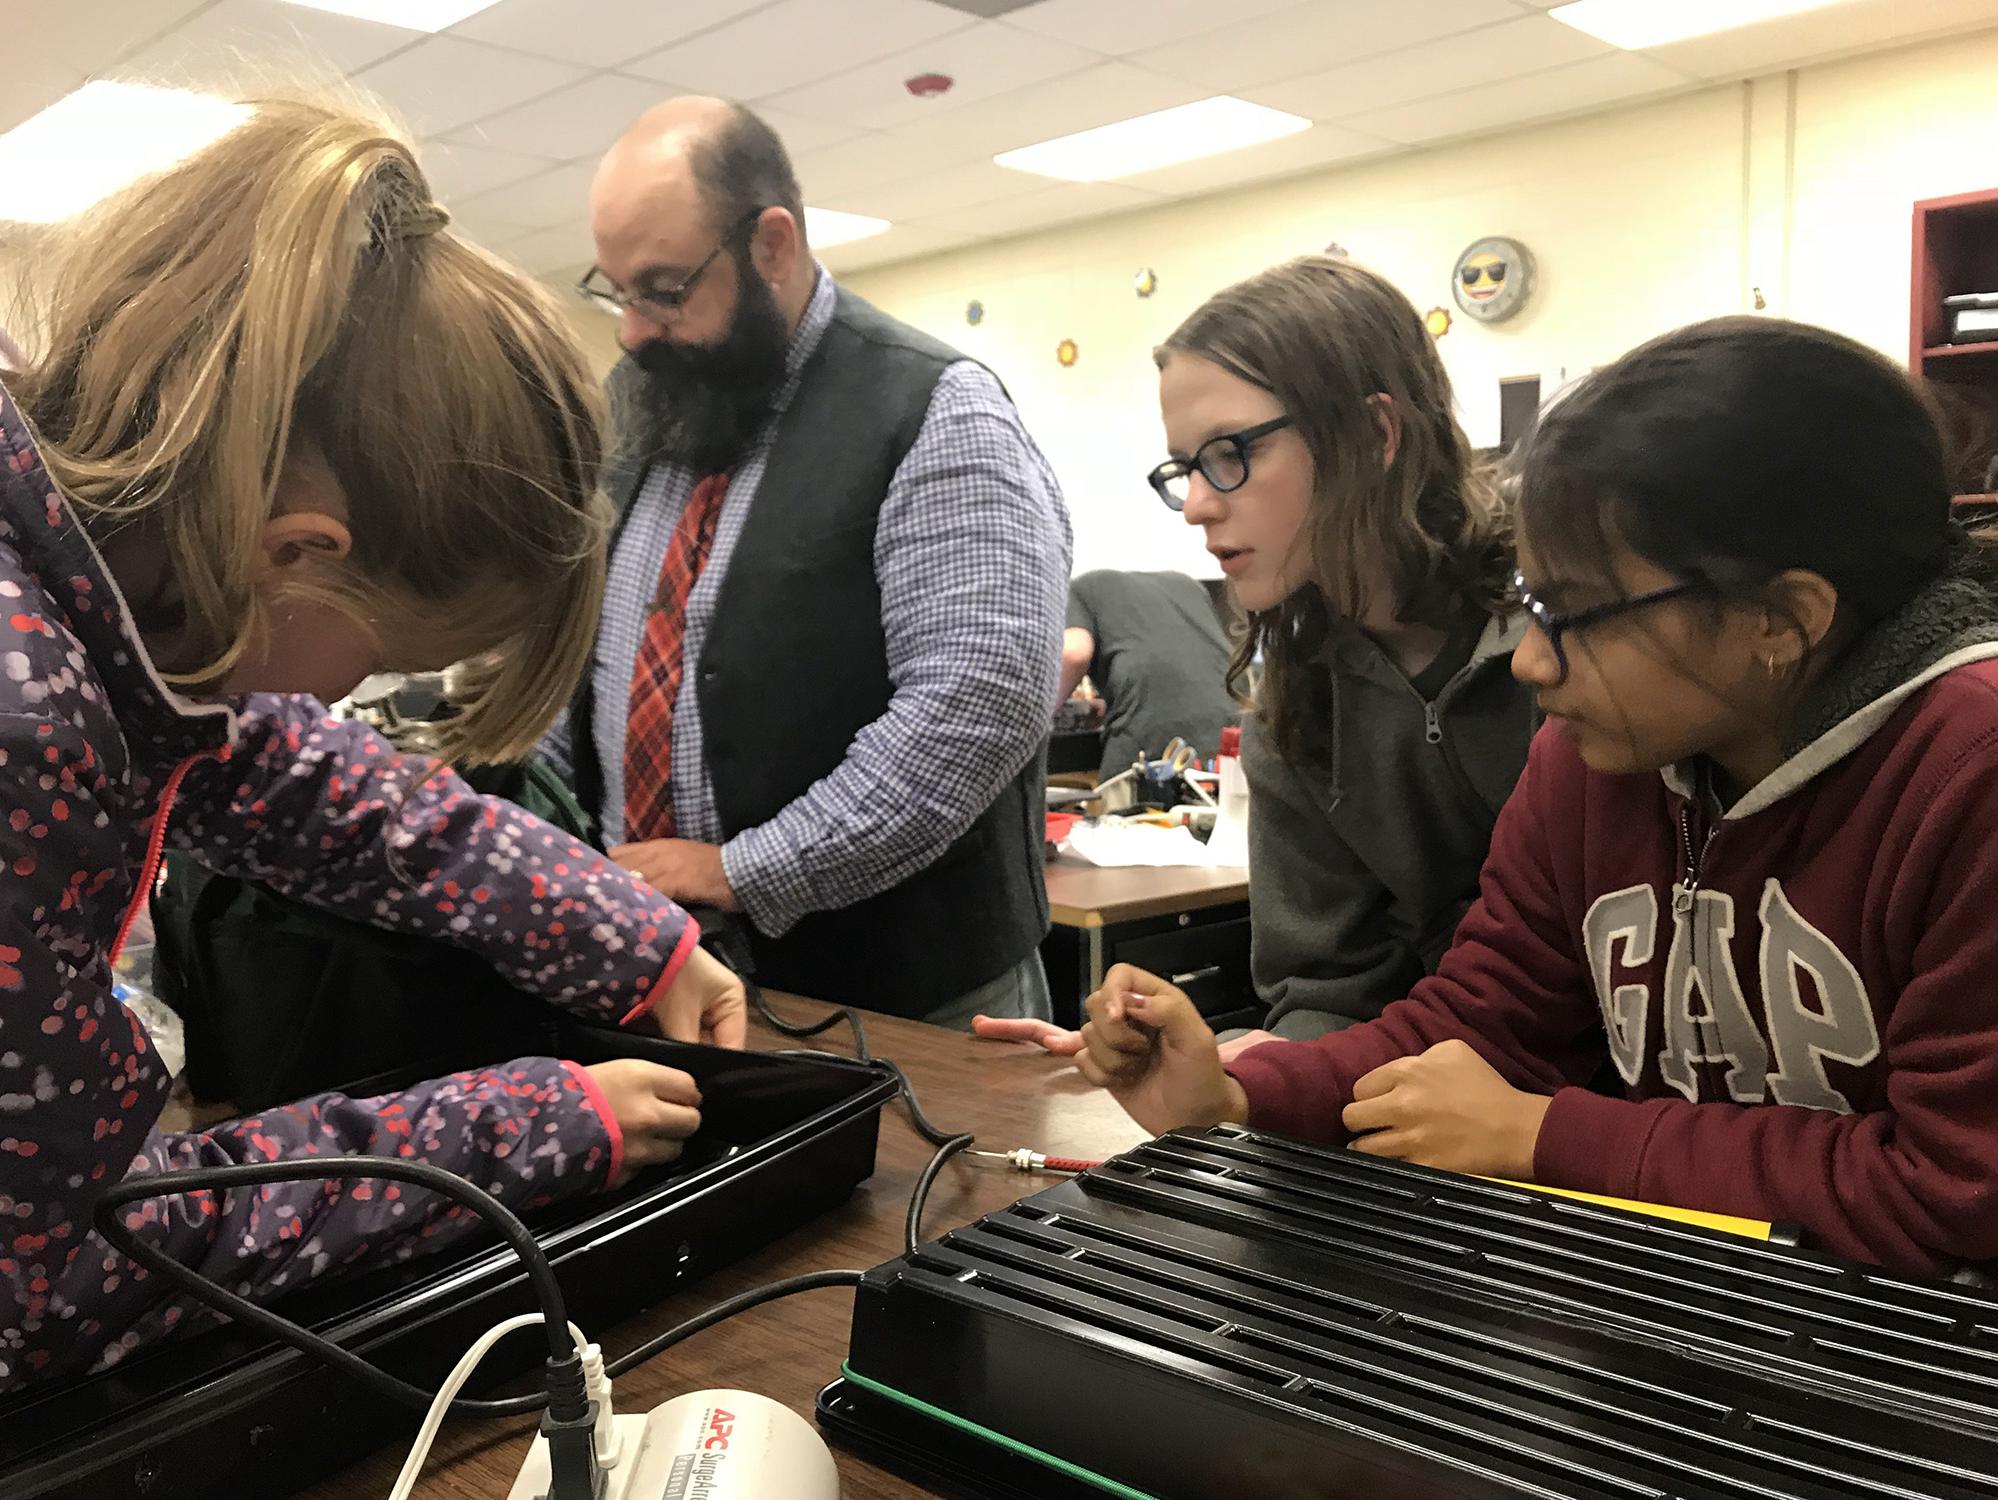 Two middle-school-aged girls and a middle-aged male teacher look on at another girl poking a hole in the side of a black tray for a science project.